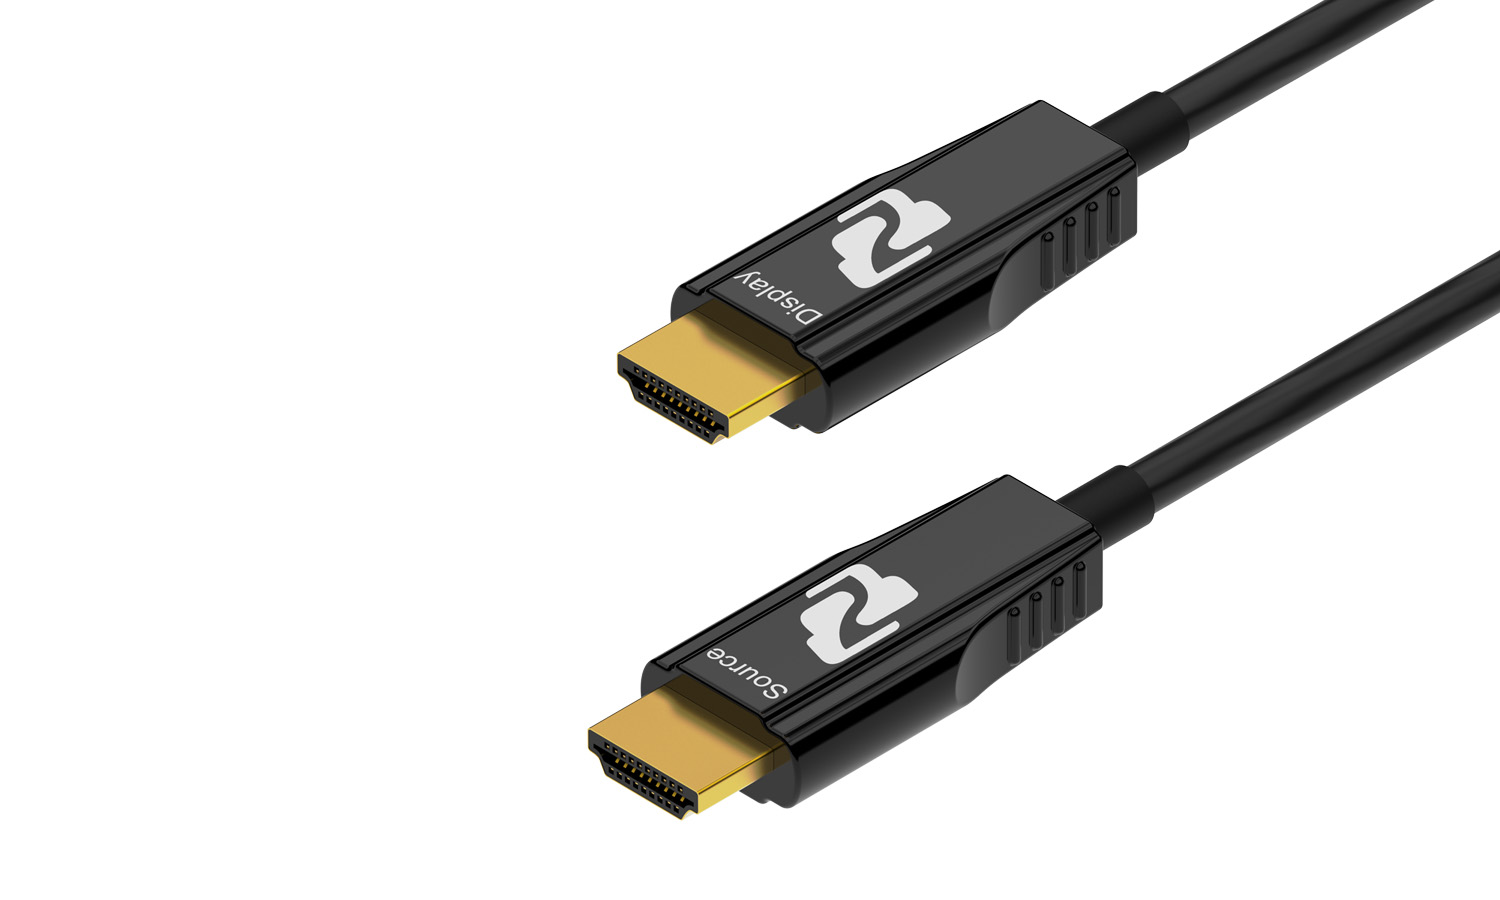 Displayport to HDMI Video Adapter at Cables N More